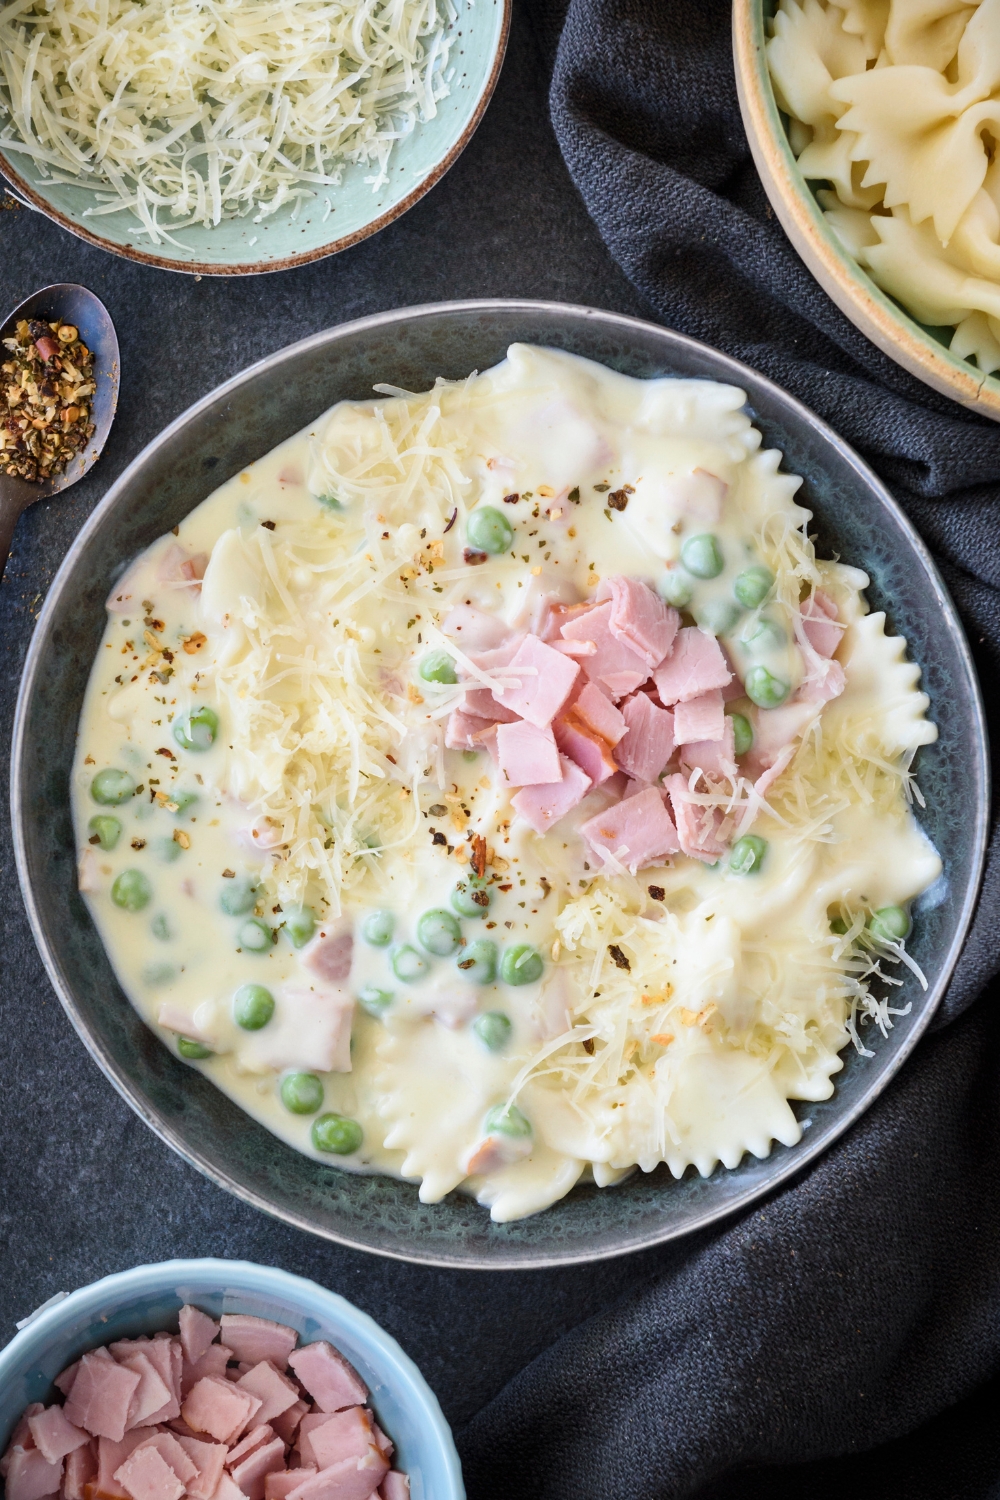 A bowl filled with pasta, ham, peas, and shredded cheese covered in cream sauce.